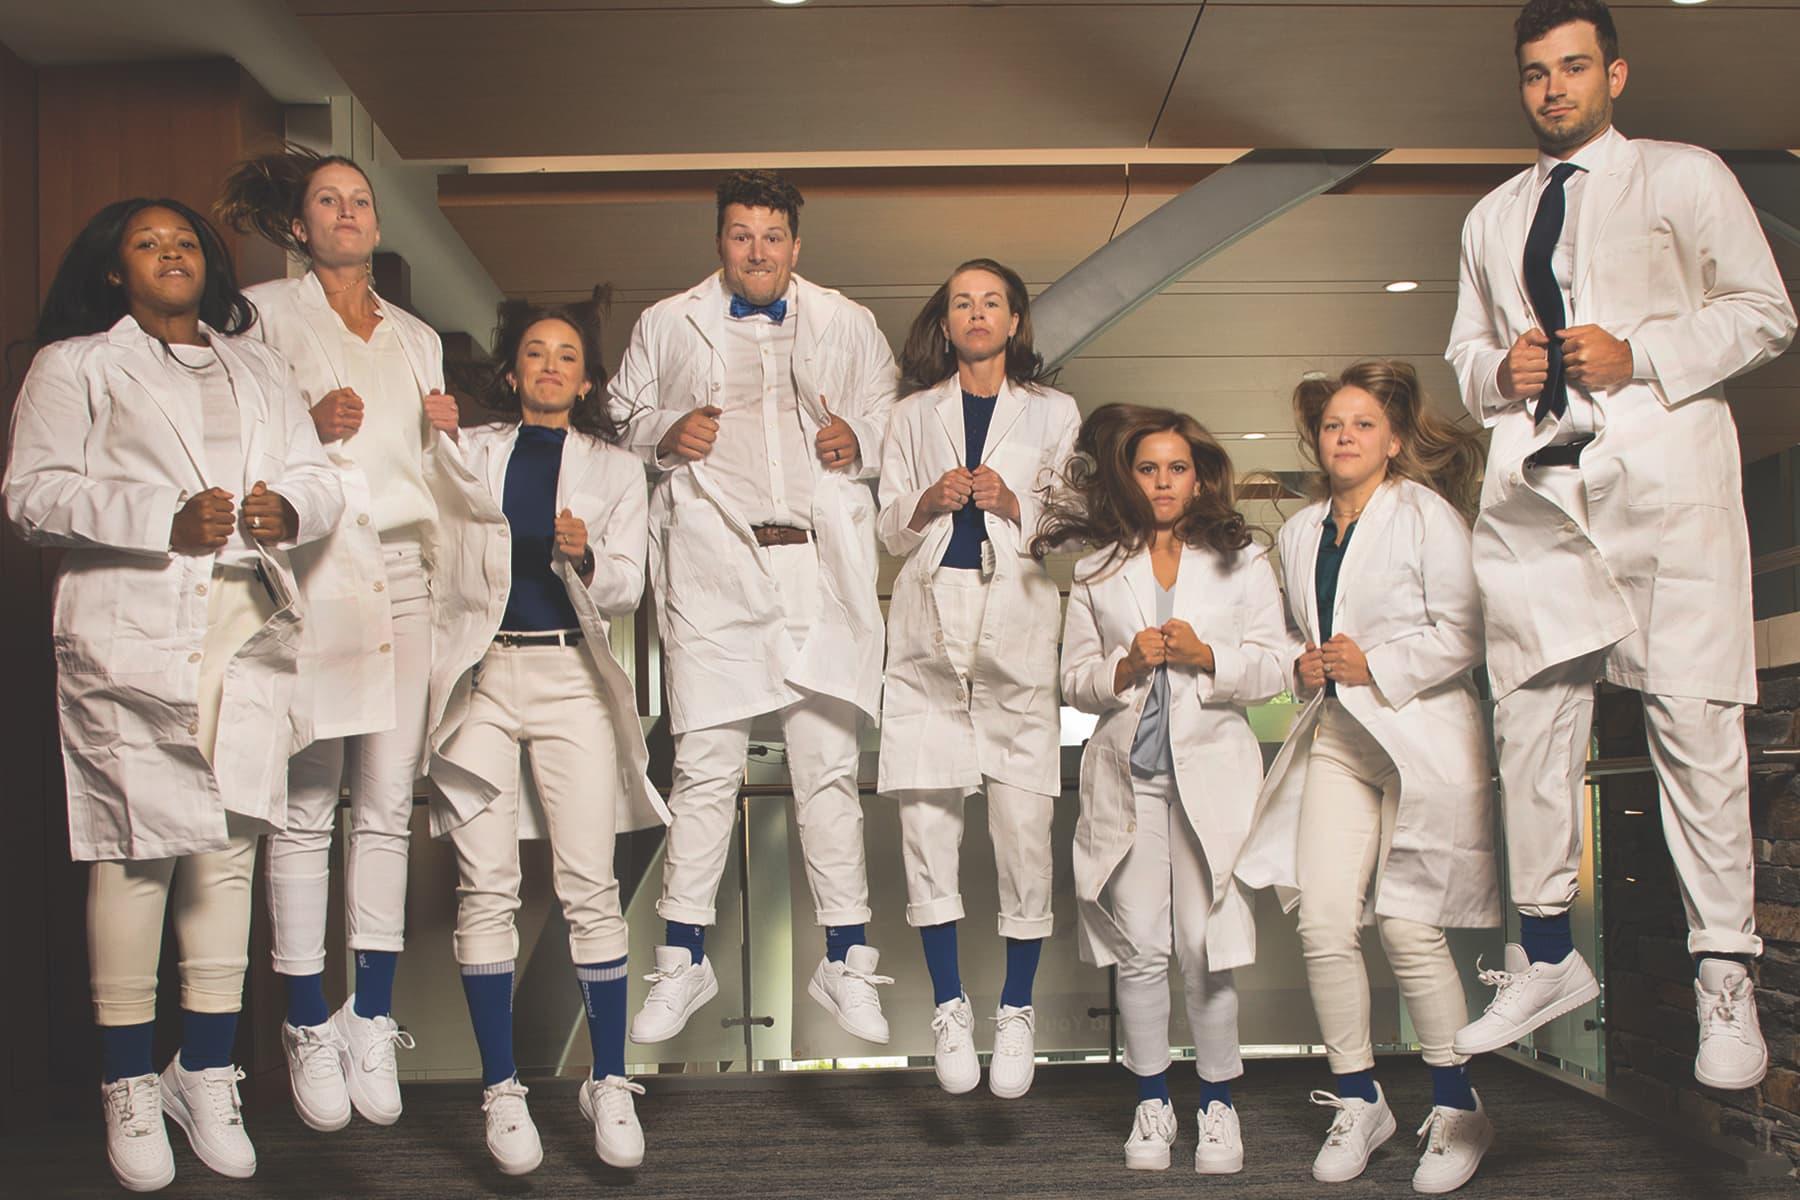 THUMBNAIL: Orthopaedic surgery residents after receiving their white coats